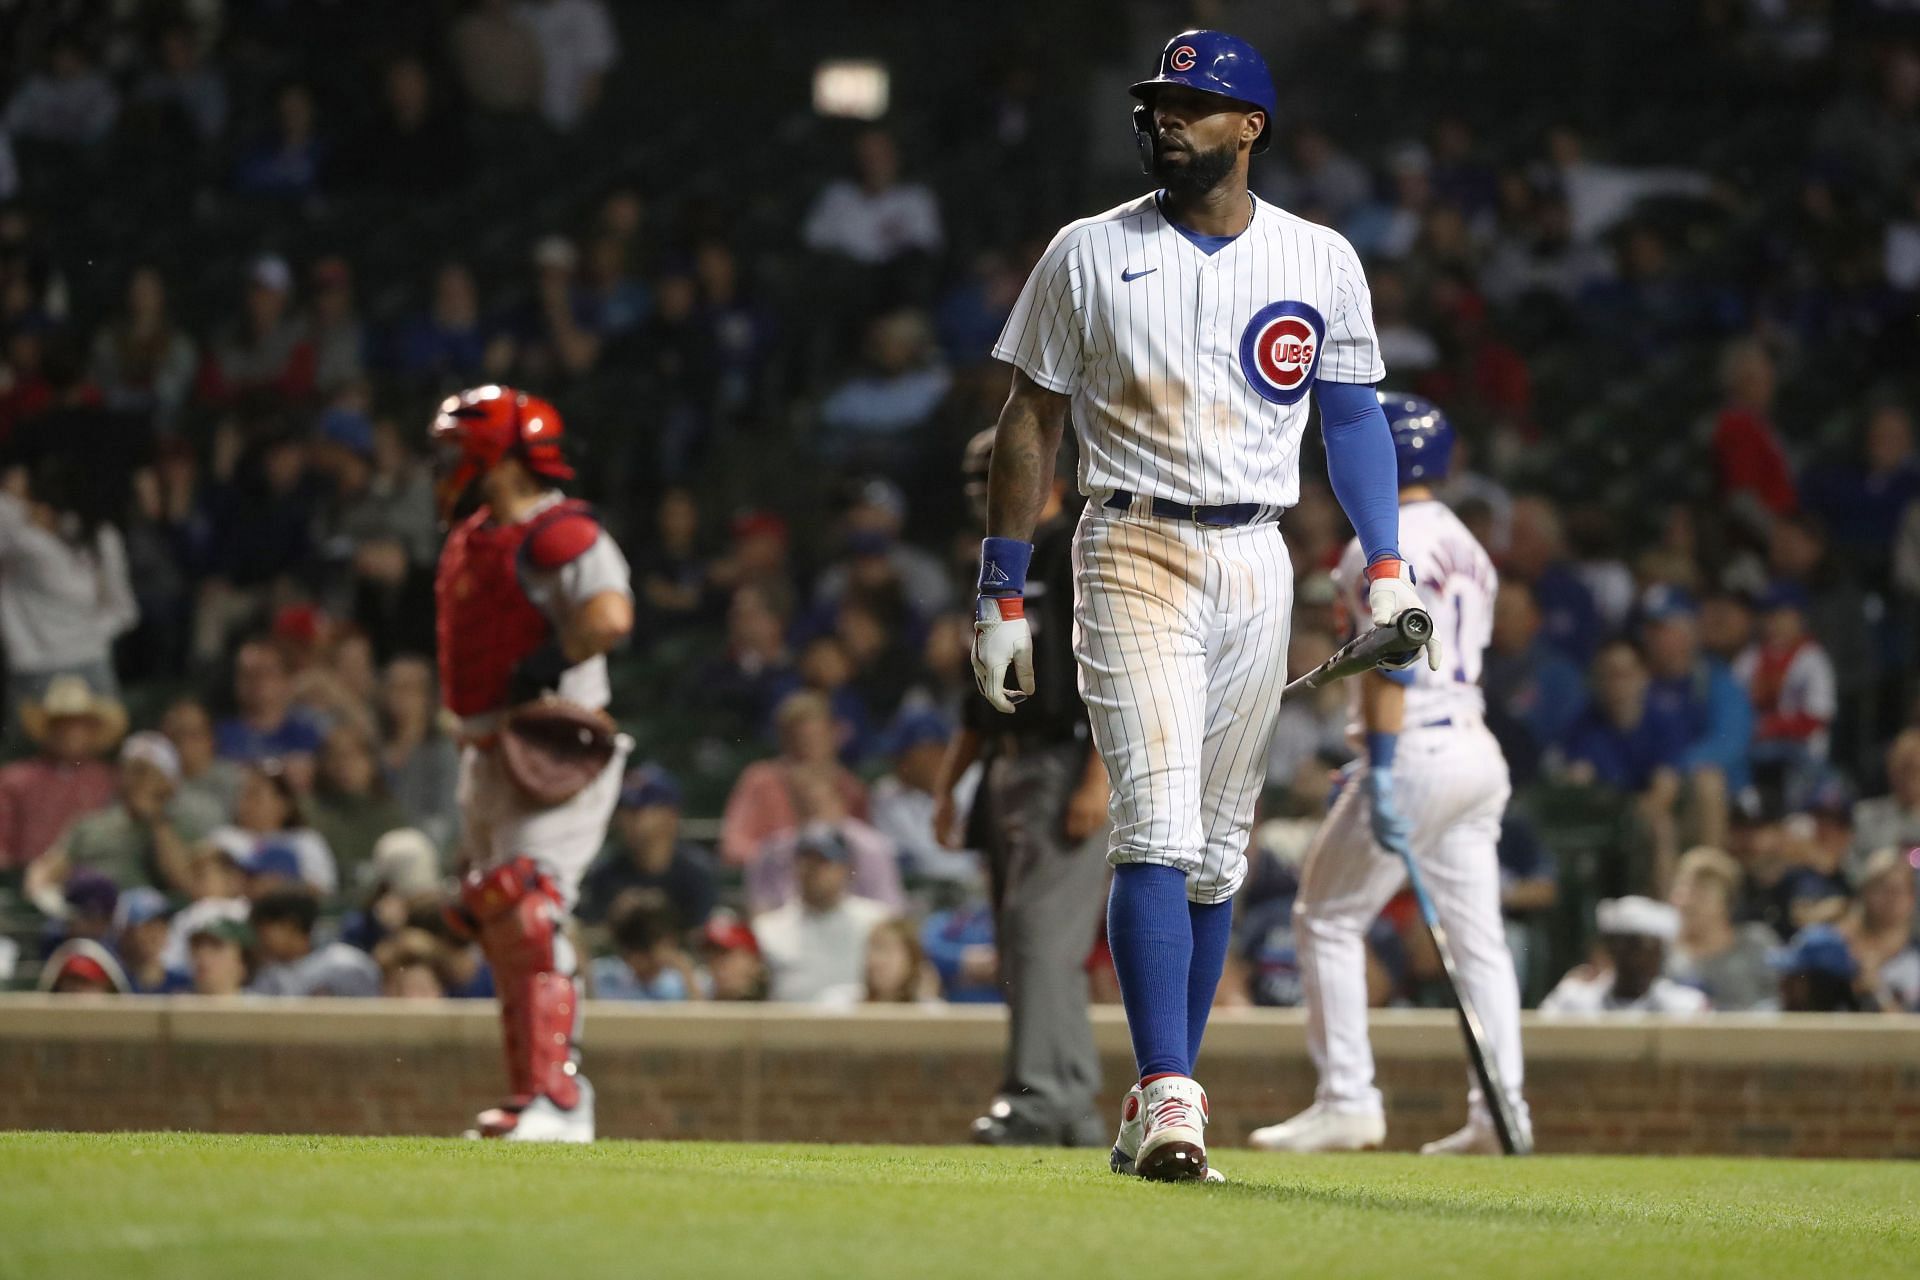 Jason Heyward reflects on time with Cubs and future plans